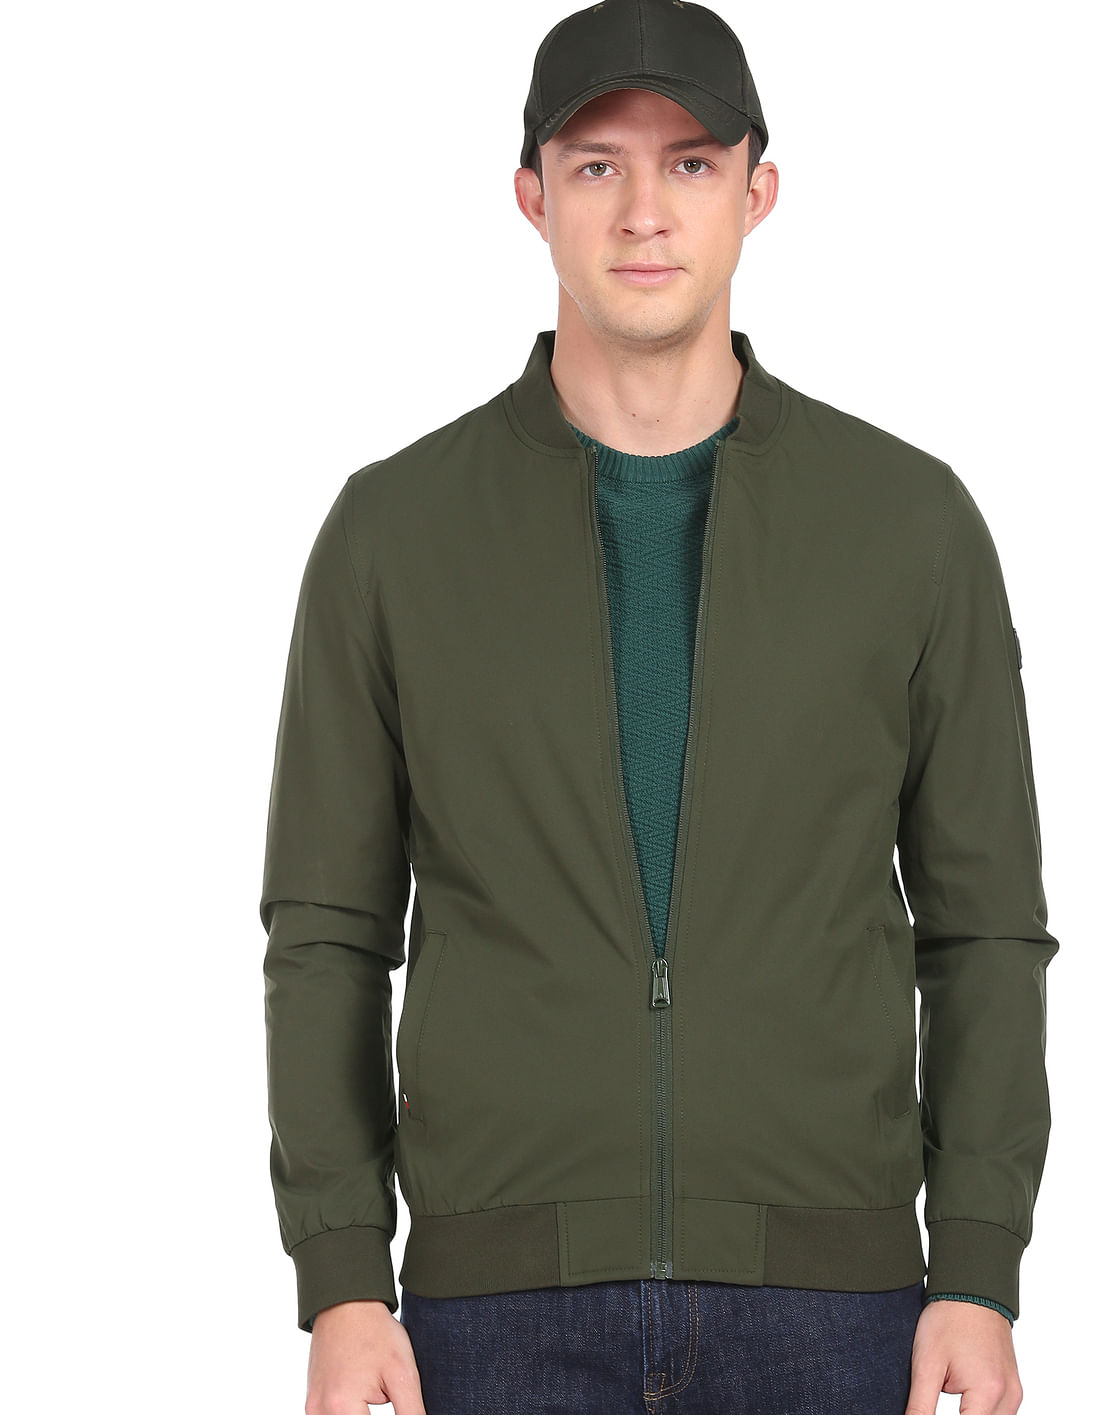 Buy Arrow Sports Stand Neck Solid Bomber Jacket - NNNOW.com